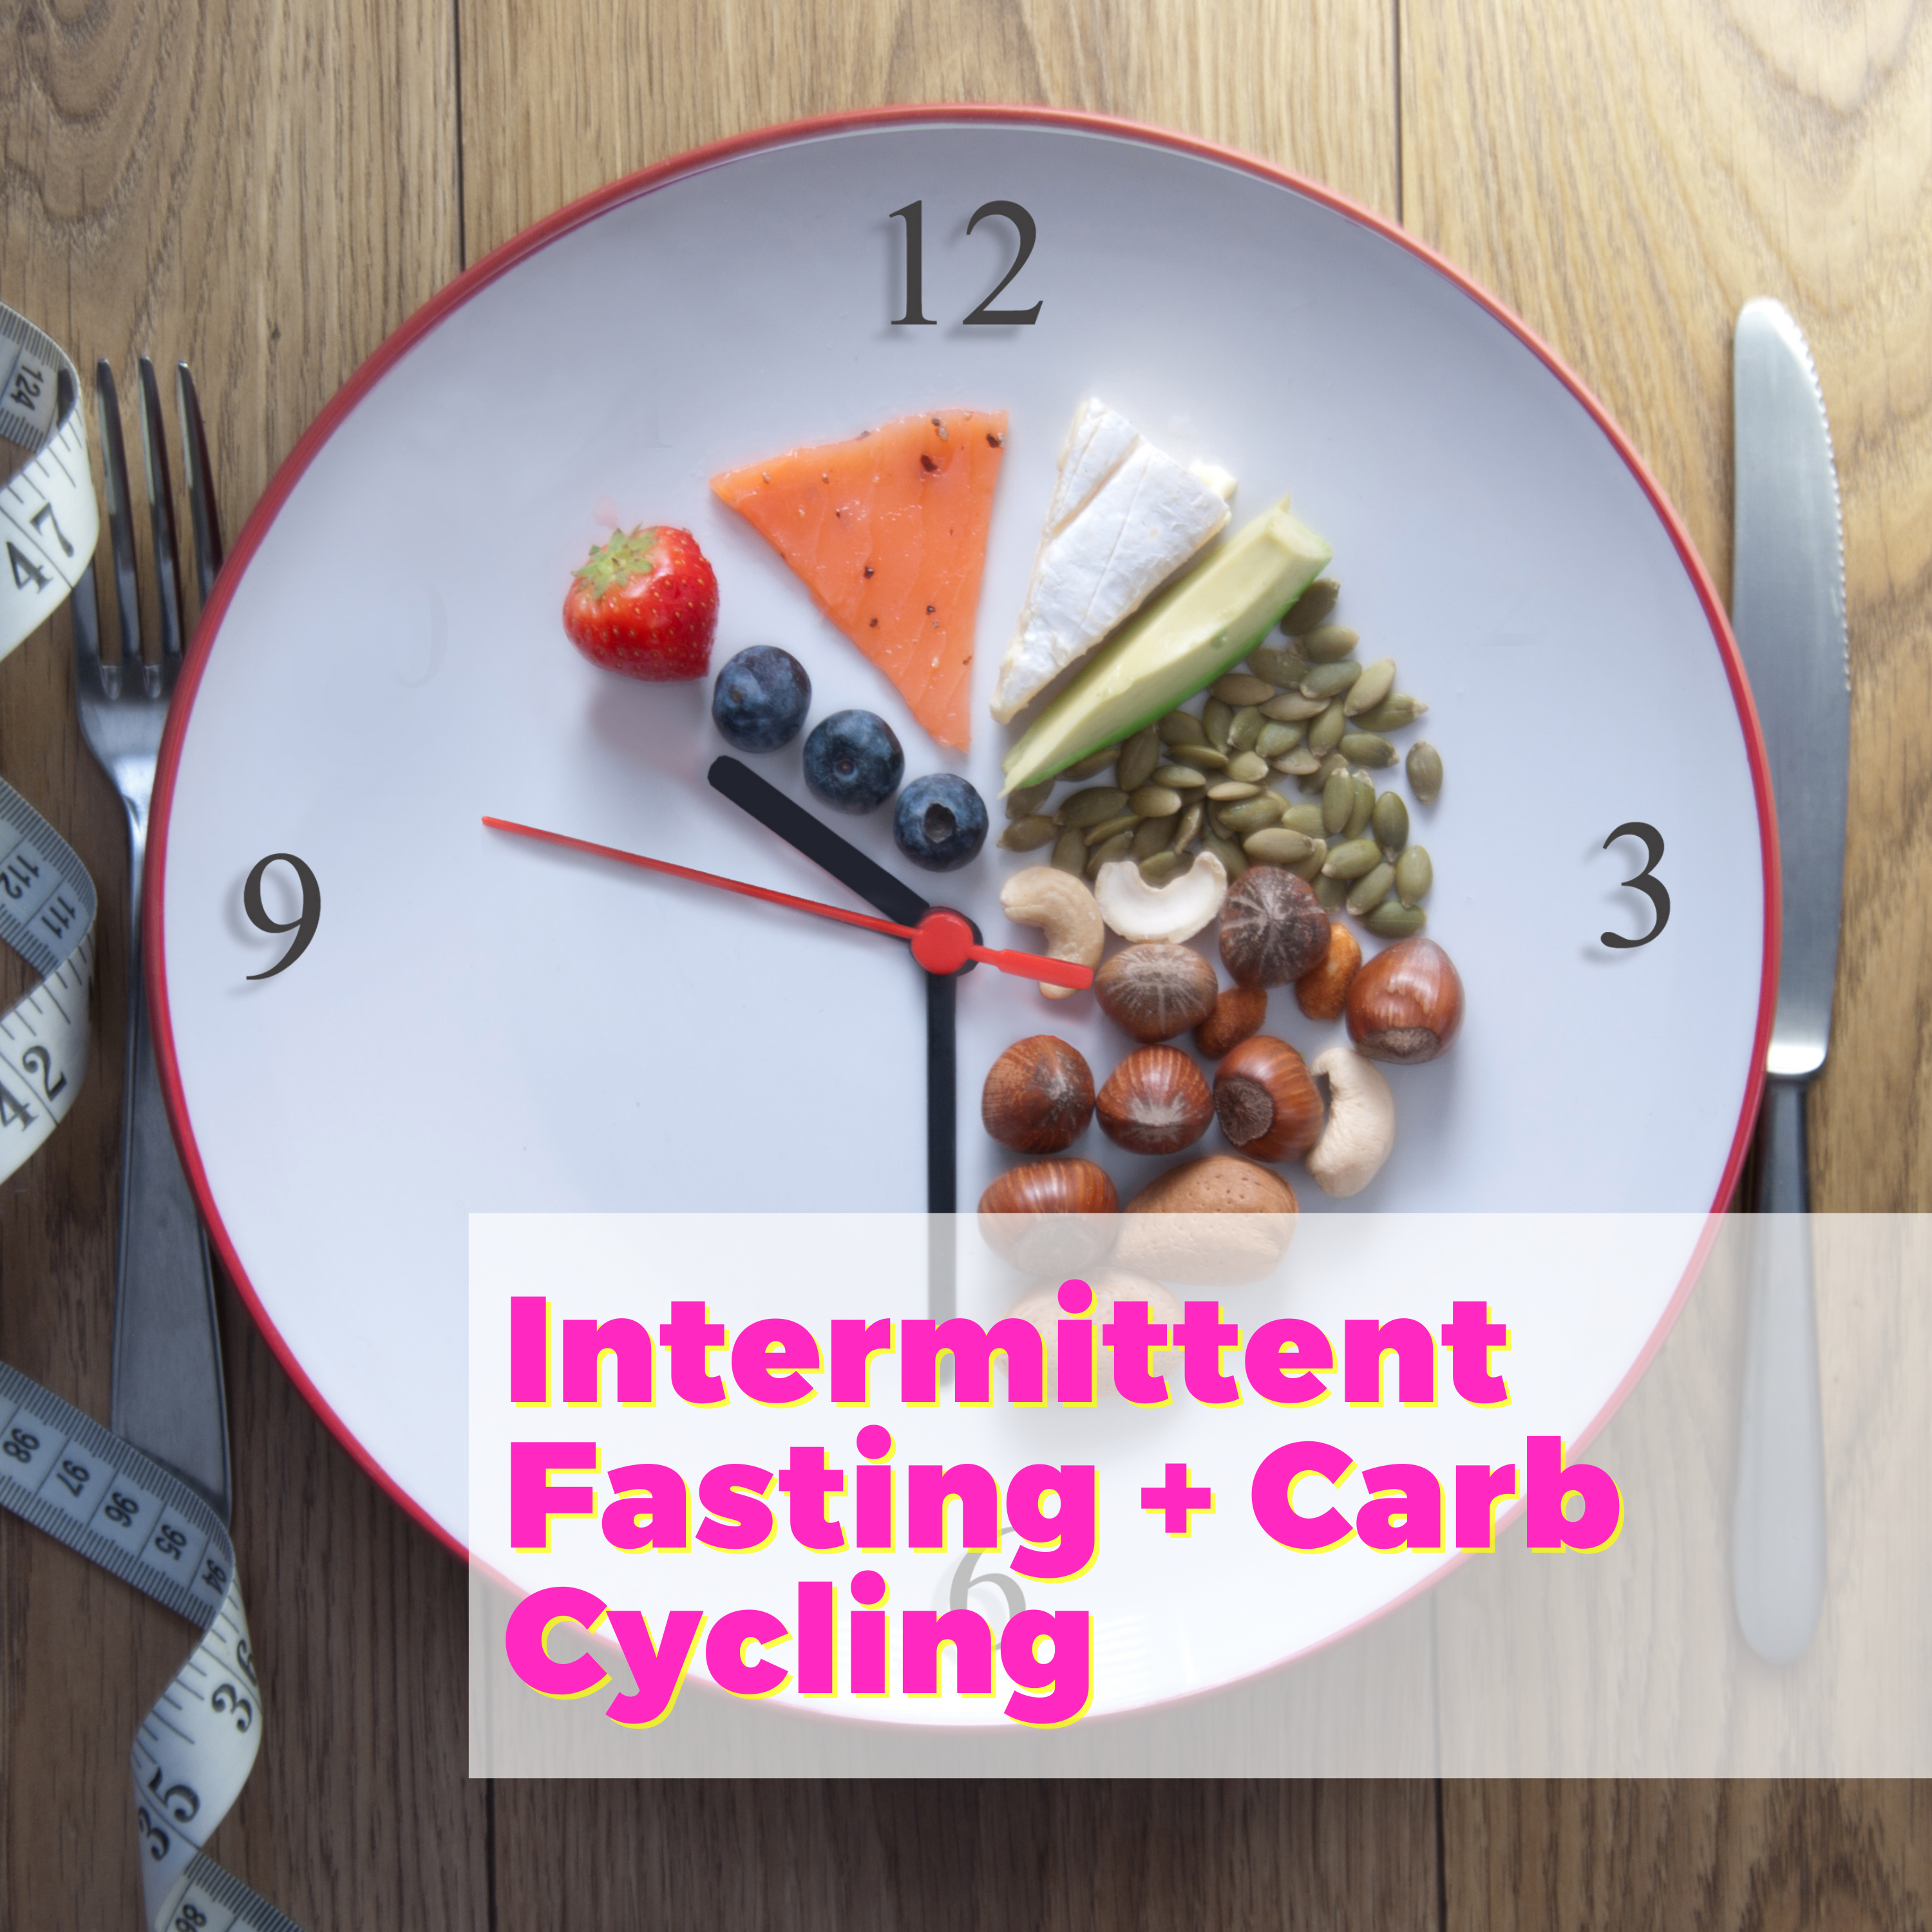 Intermittent Fasting, Carb Cycling And Macros To Support Midlife Body Changes With Le Bergin and Natalie Jill